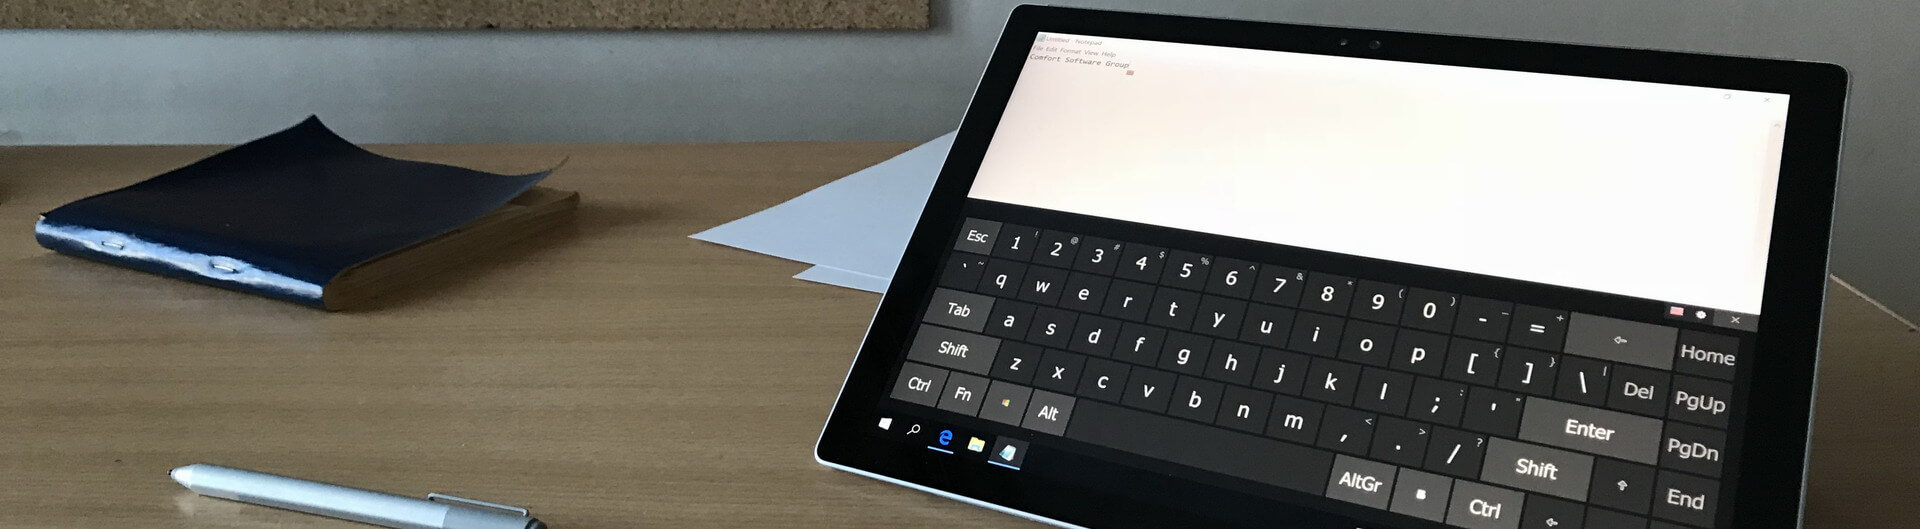 pen and touch download windows 10